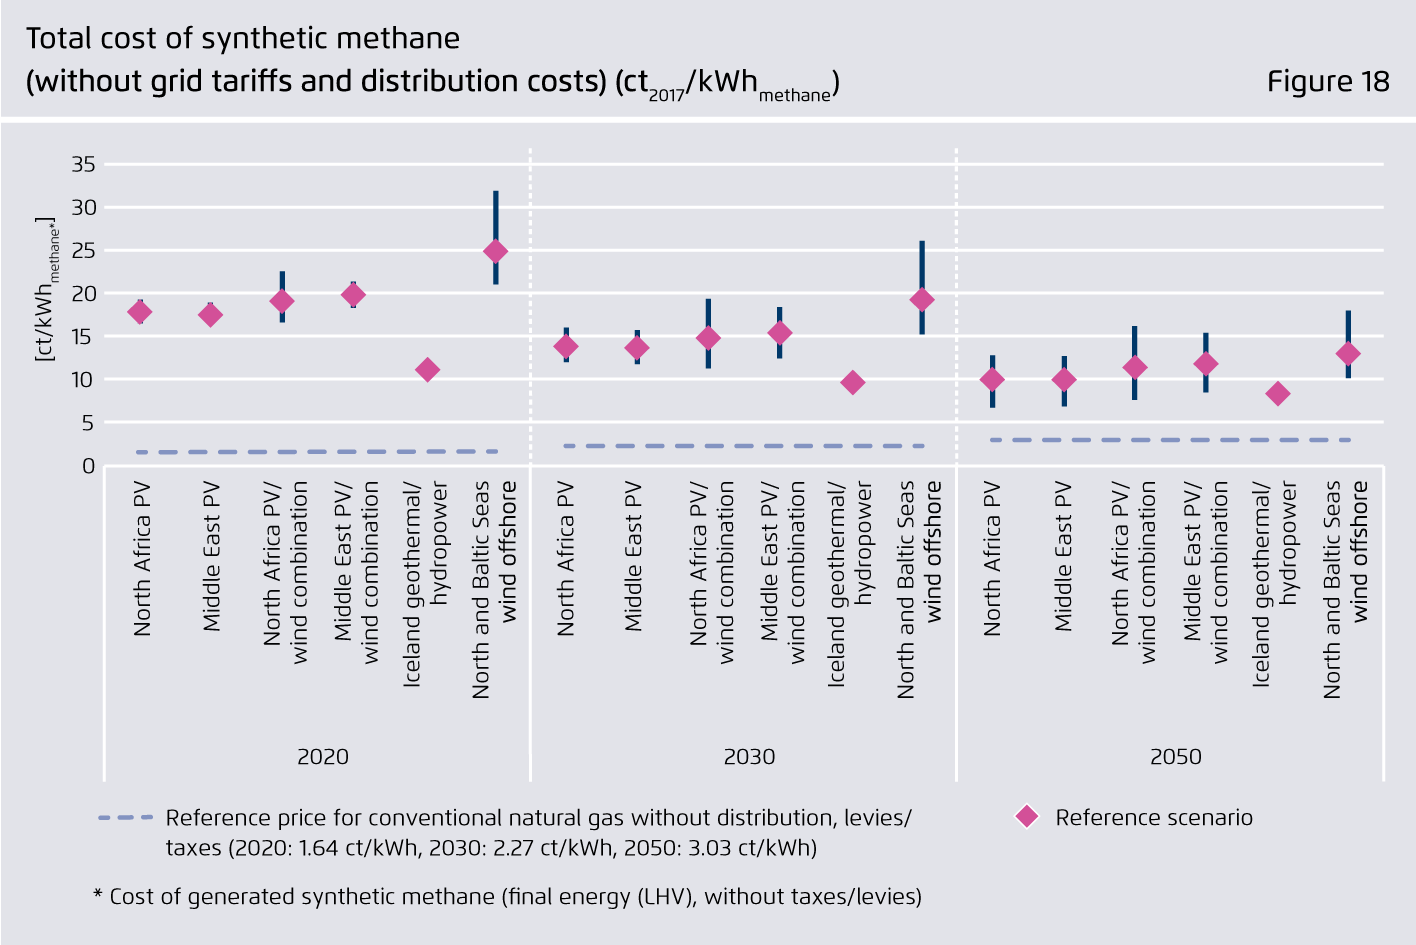 Preview for Total cost of synthetic methane (without grid tariffs and distribution costs) (ct2017/kWhmethane)